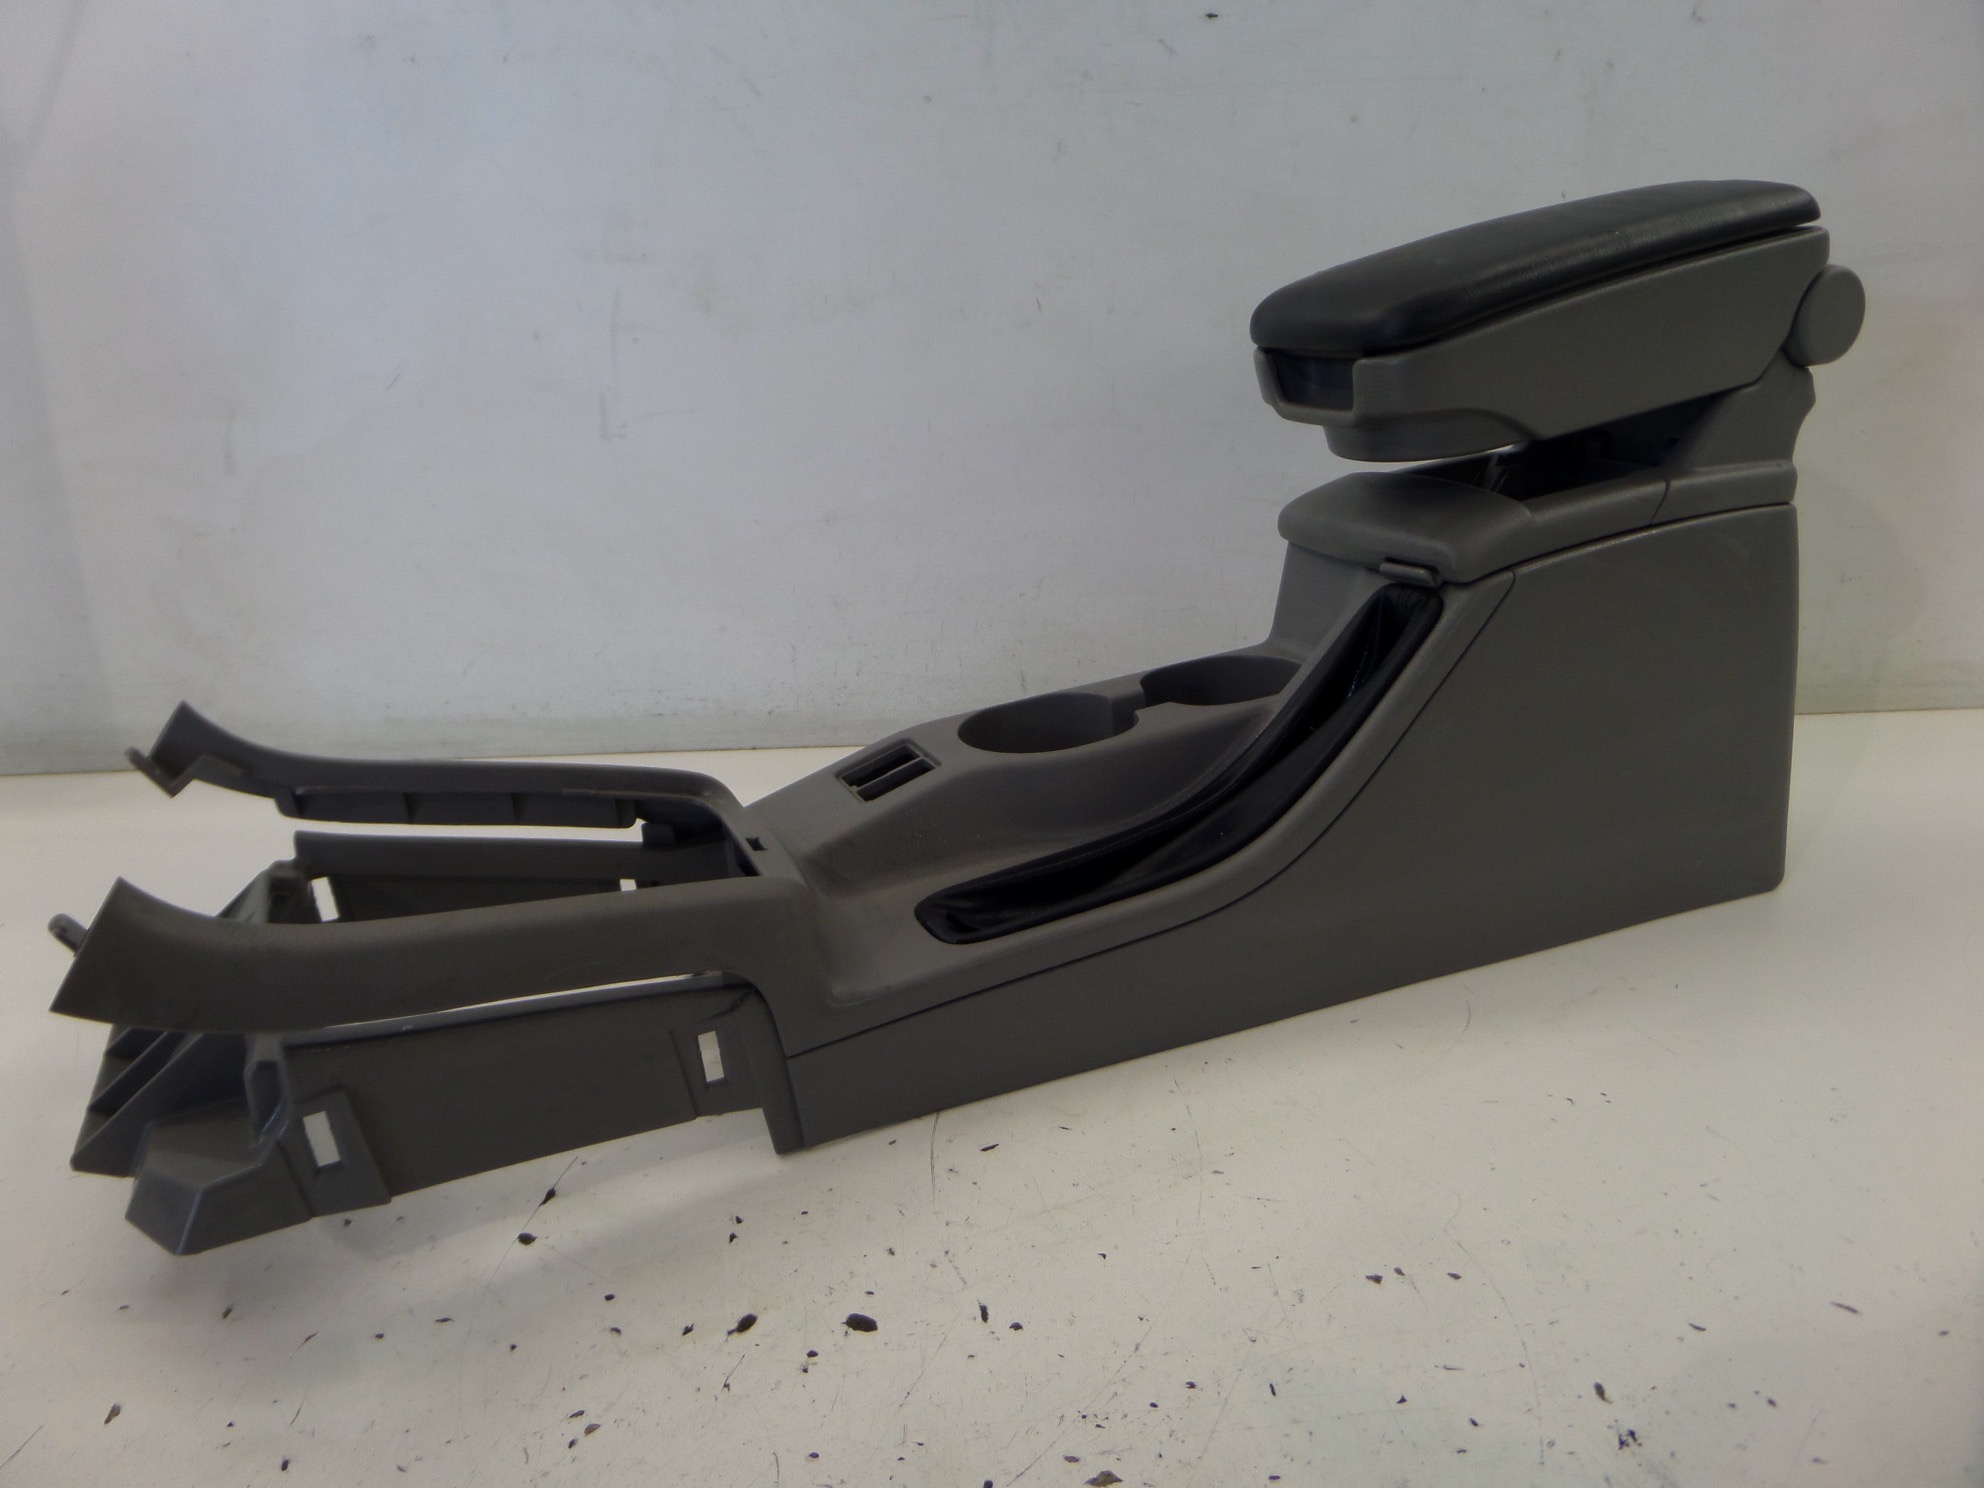 Subaru Forester 2.5XT Center Cup Holder Arm Rest Console